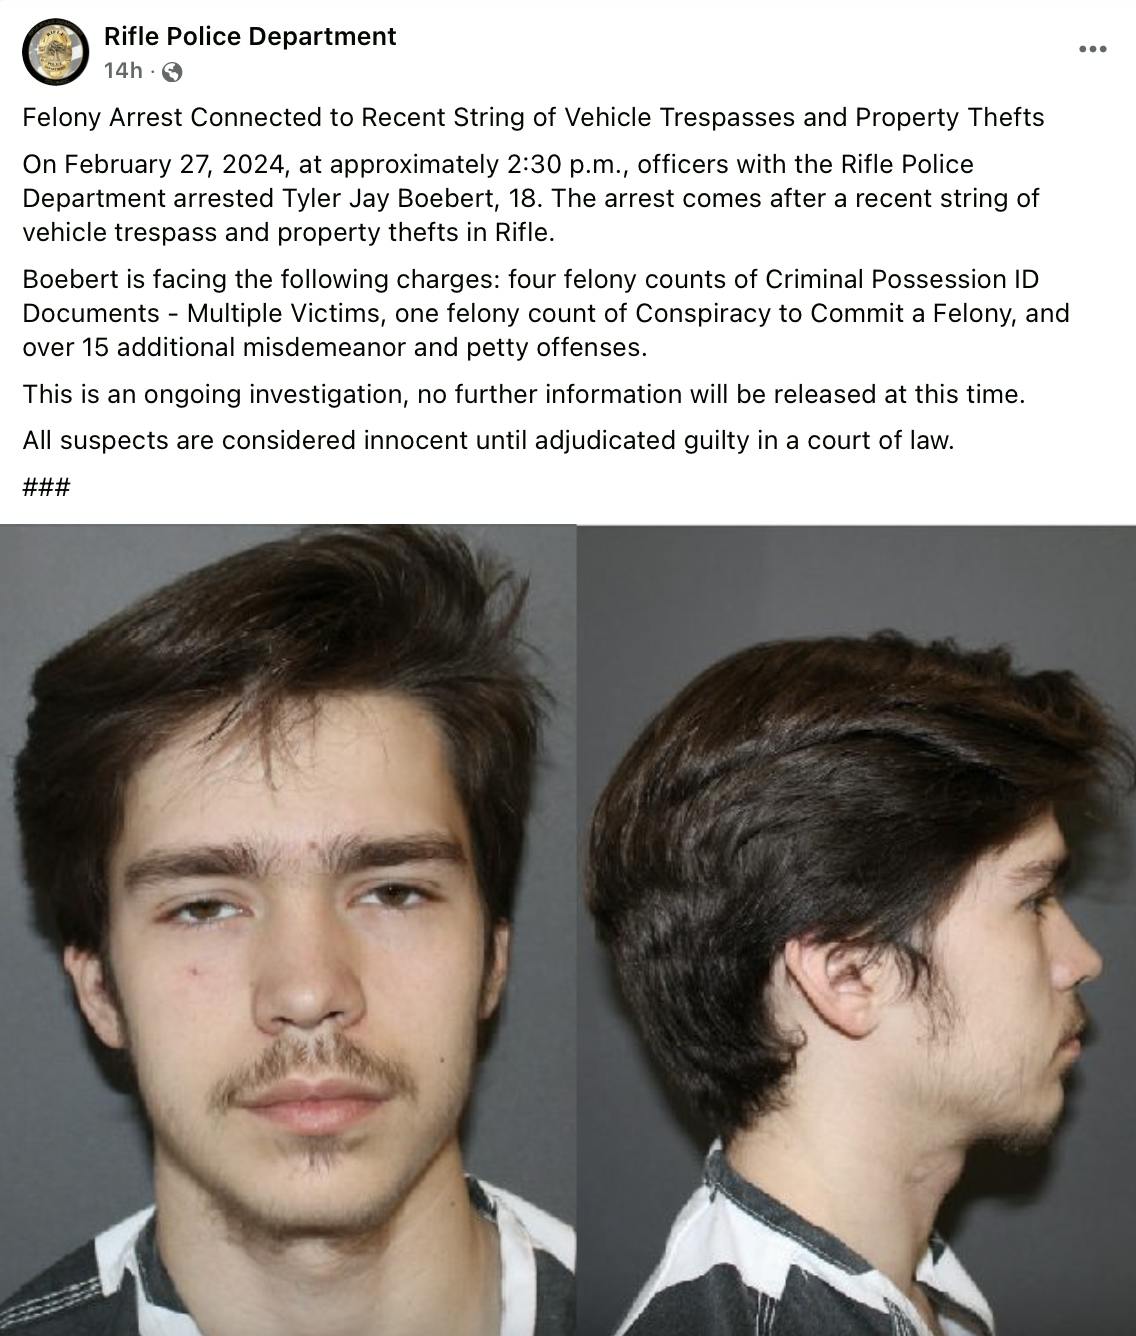 A Facebook post from the Rifle Police Department explains why Tyler Boebert was arrested and shows his mugshot